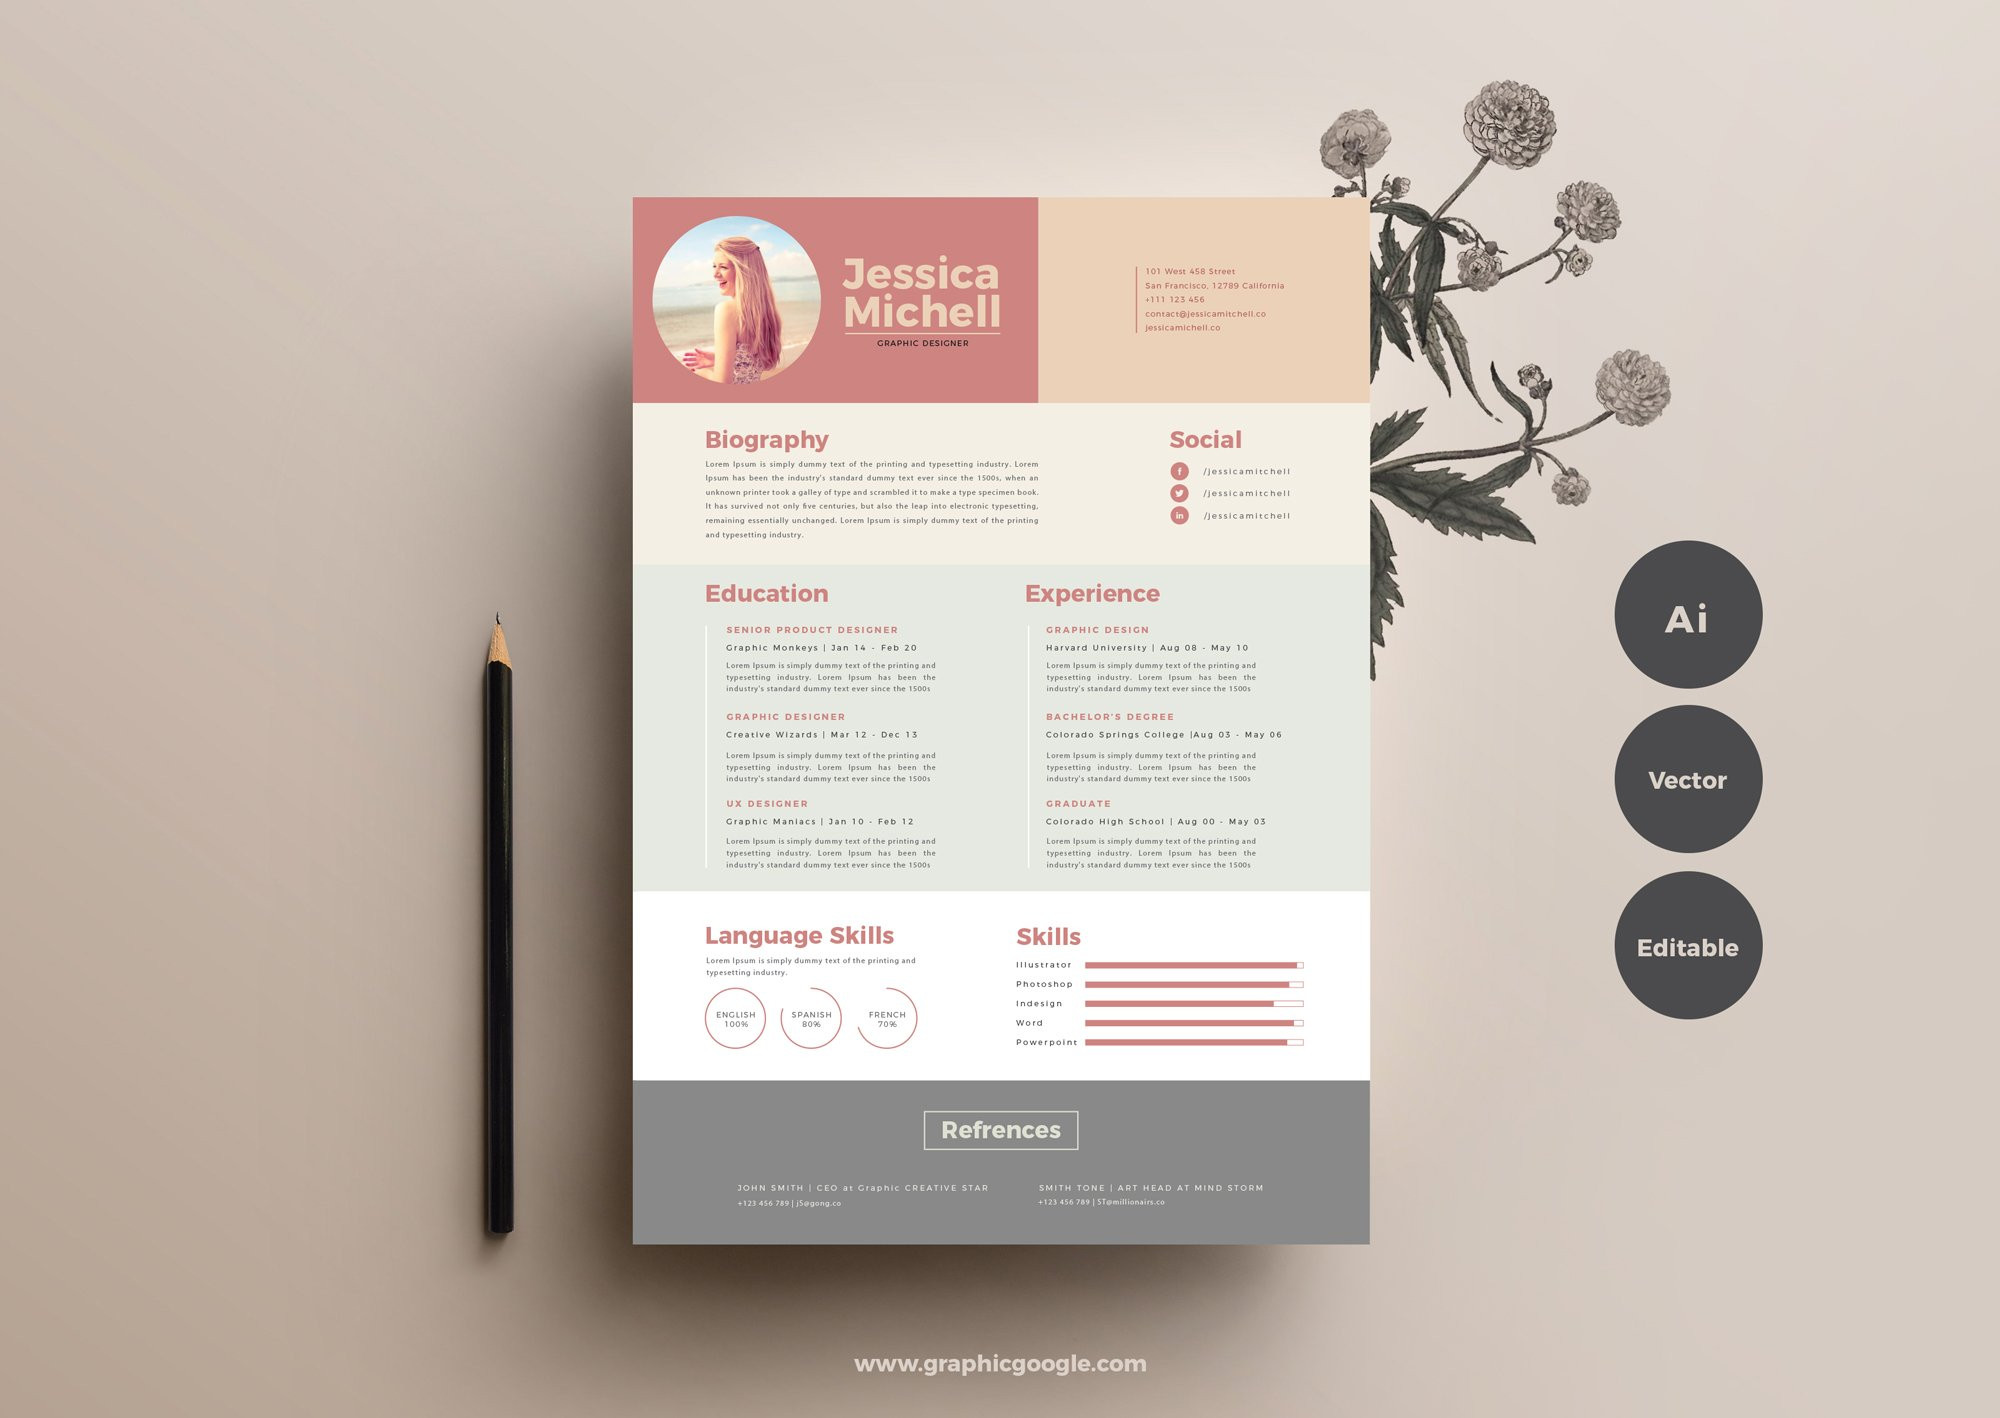 Free Resume Templates for Graphic Designers Free Simple and Elegant Resume Template In Illustrator (ai) format …